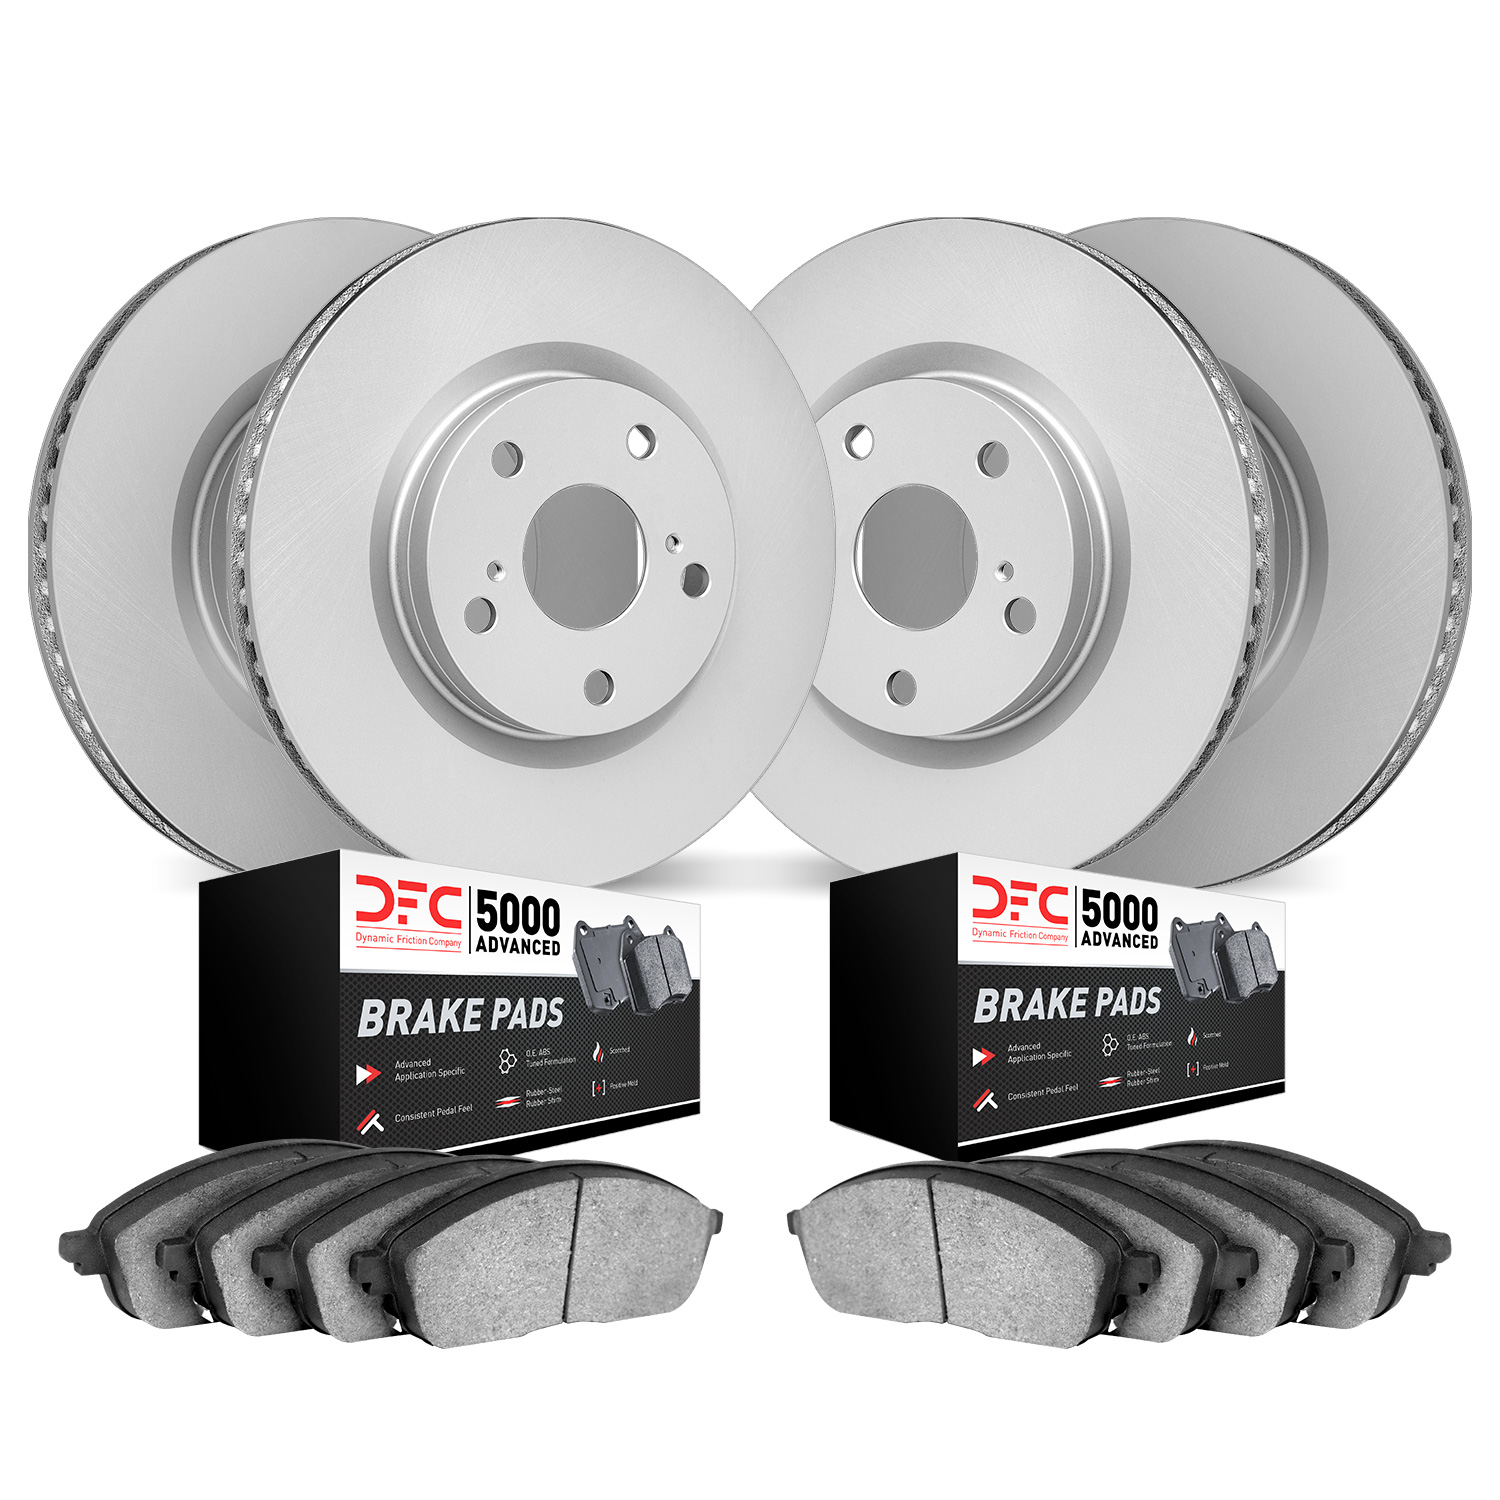 4504-63051 Geospec Brake Rotors w/5000 Advanced Brake Pads Kit, 2010-2016 Mercedes-Benz, Position: Front and Rear